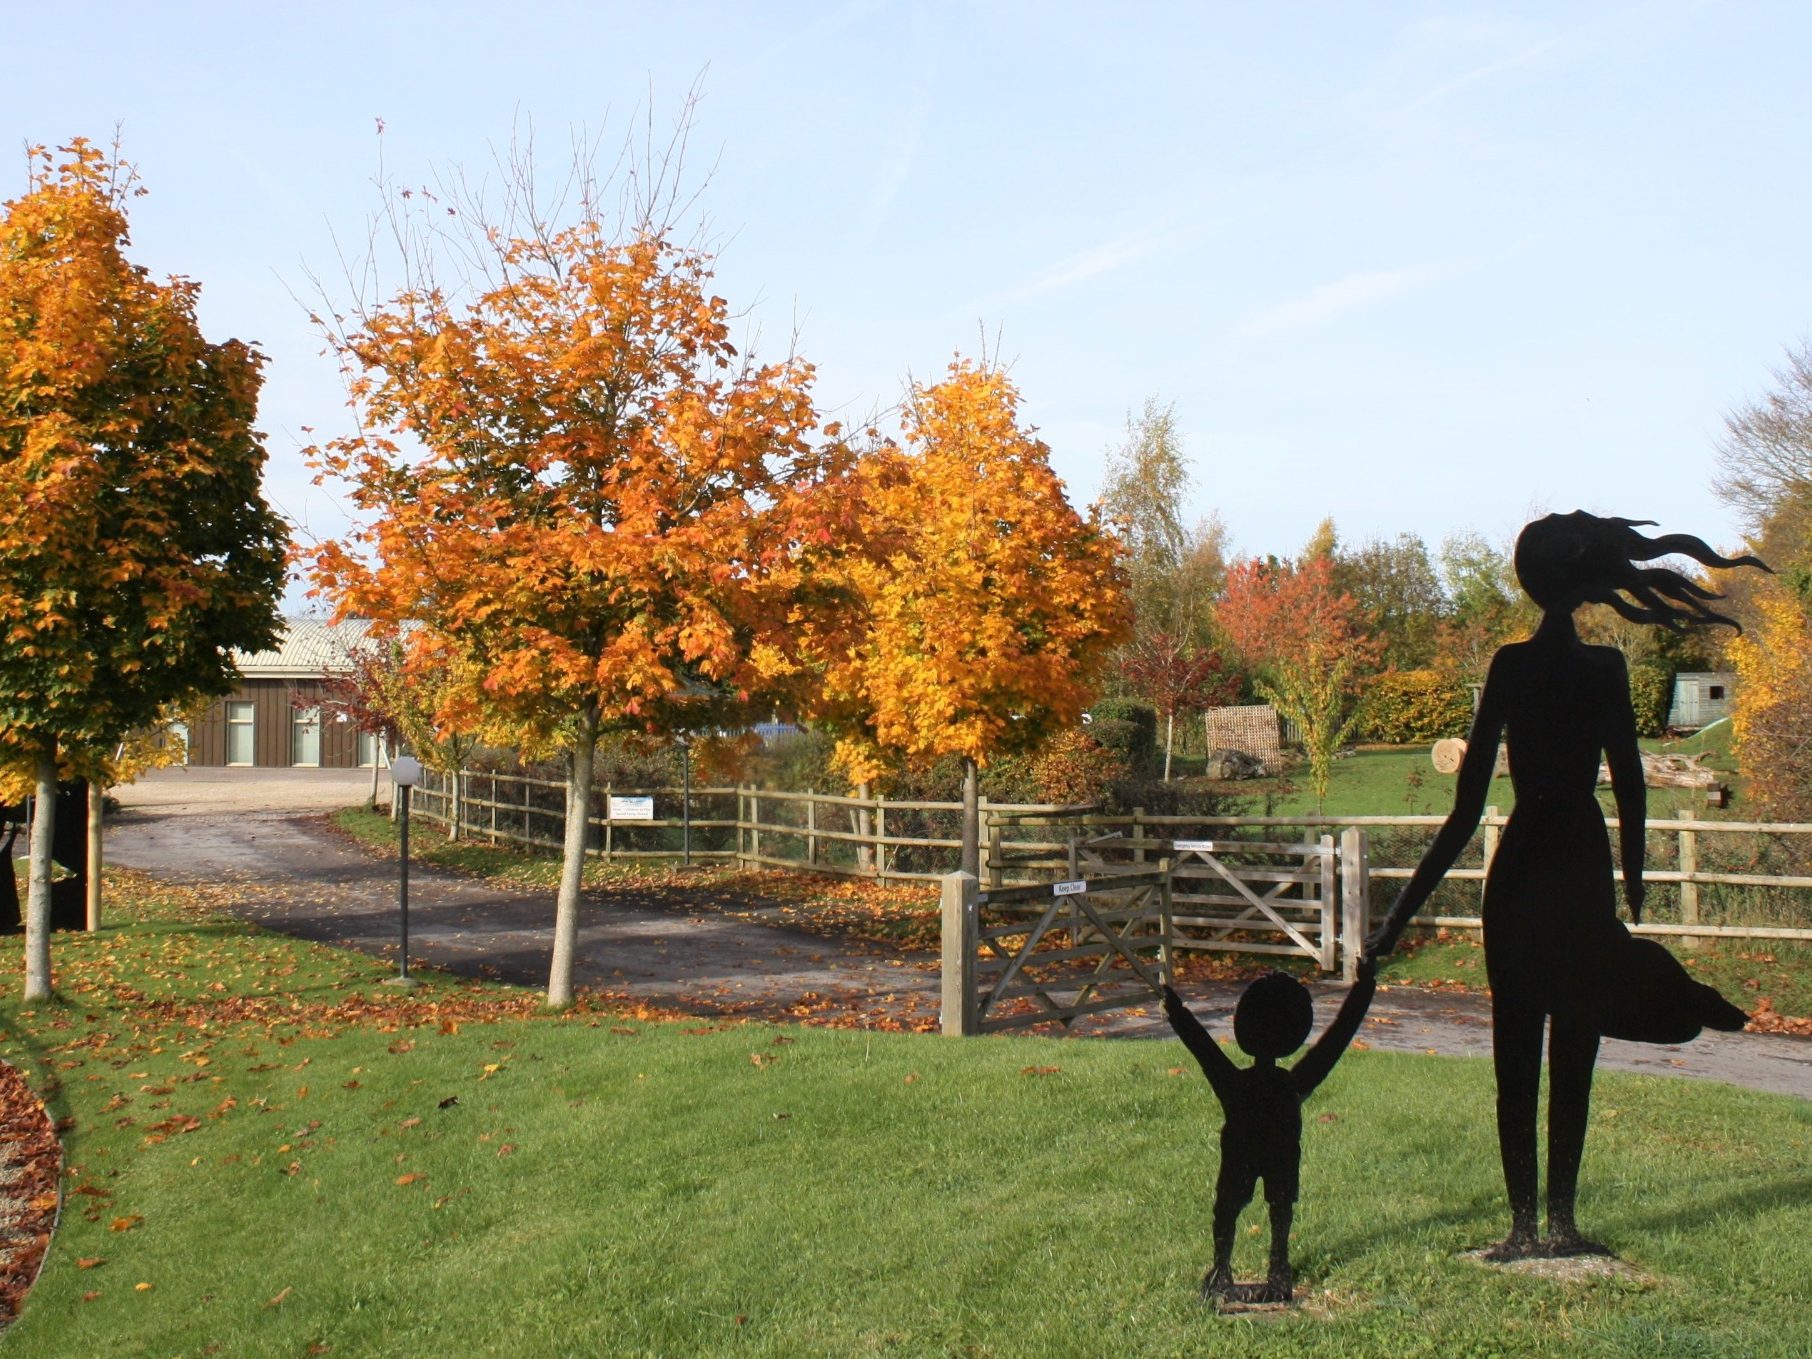 A picture of a sculpture at Learning Curve Day Nursery showing a mother and her child